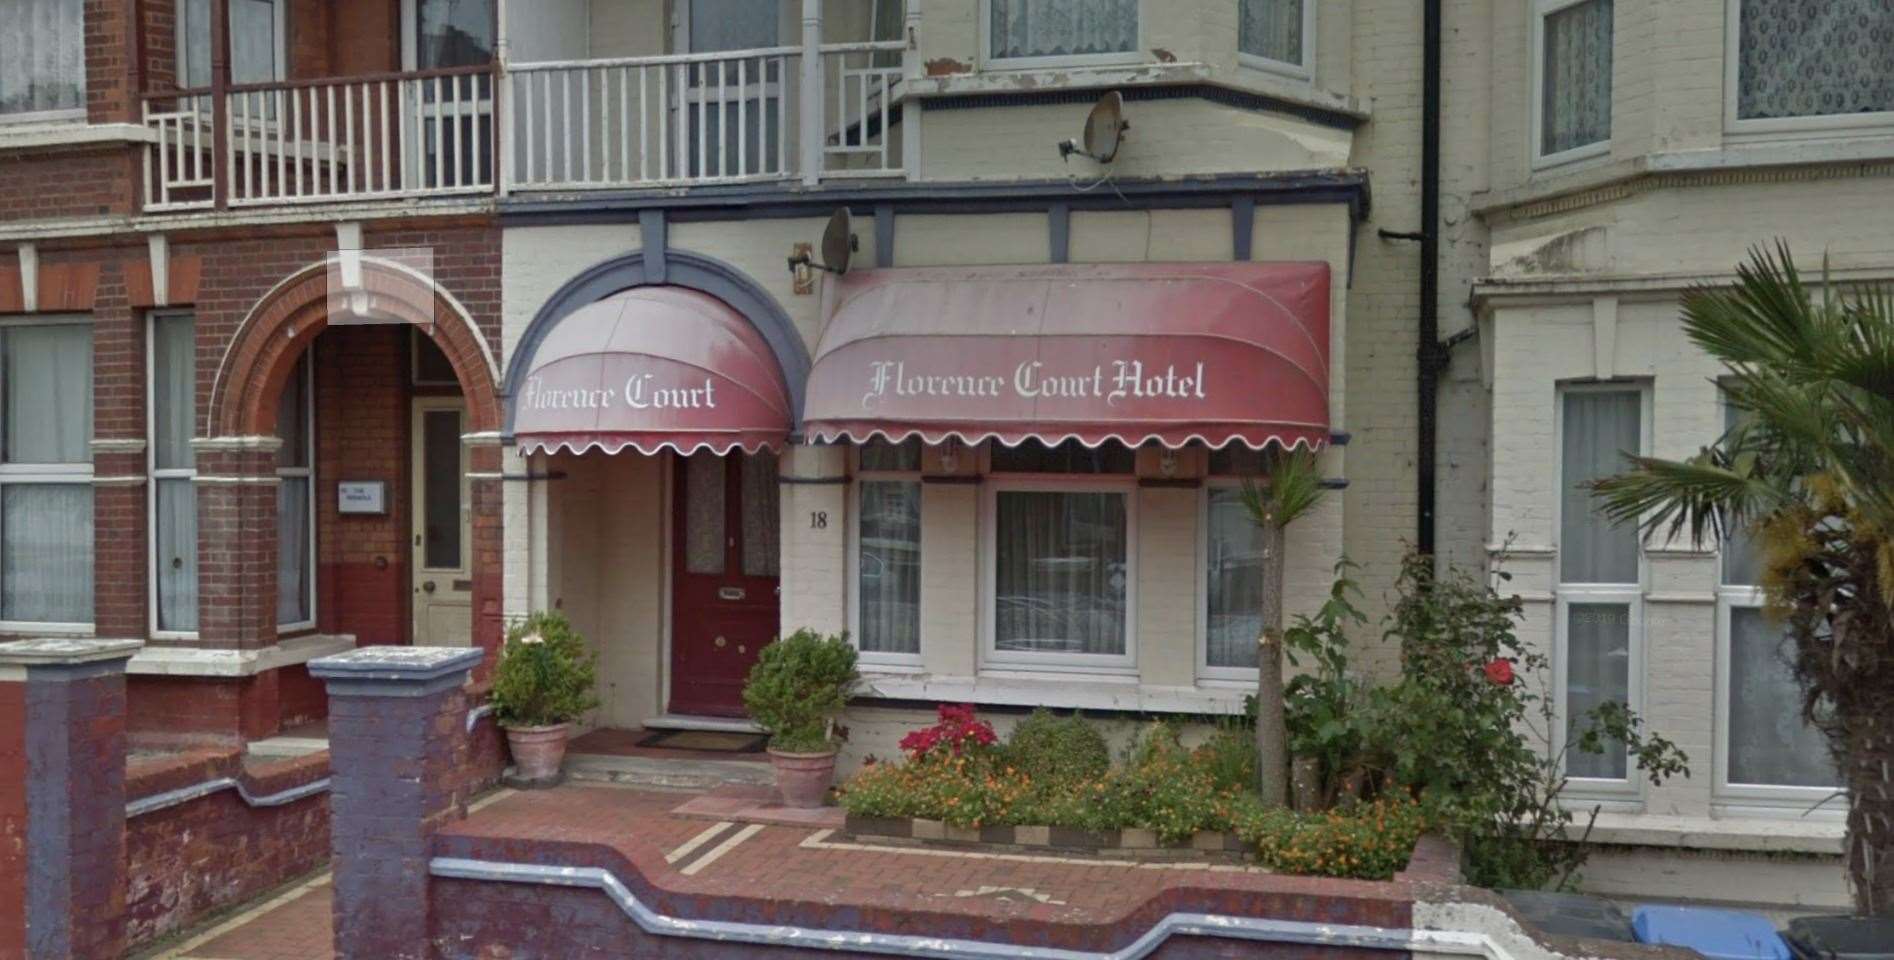 A probe has been launched after complaints were lodged about Florence Court Hotel in Margate